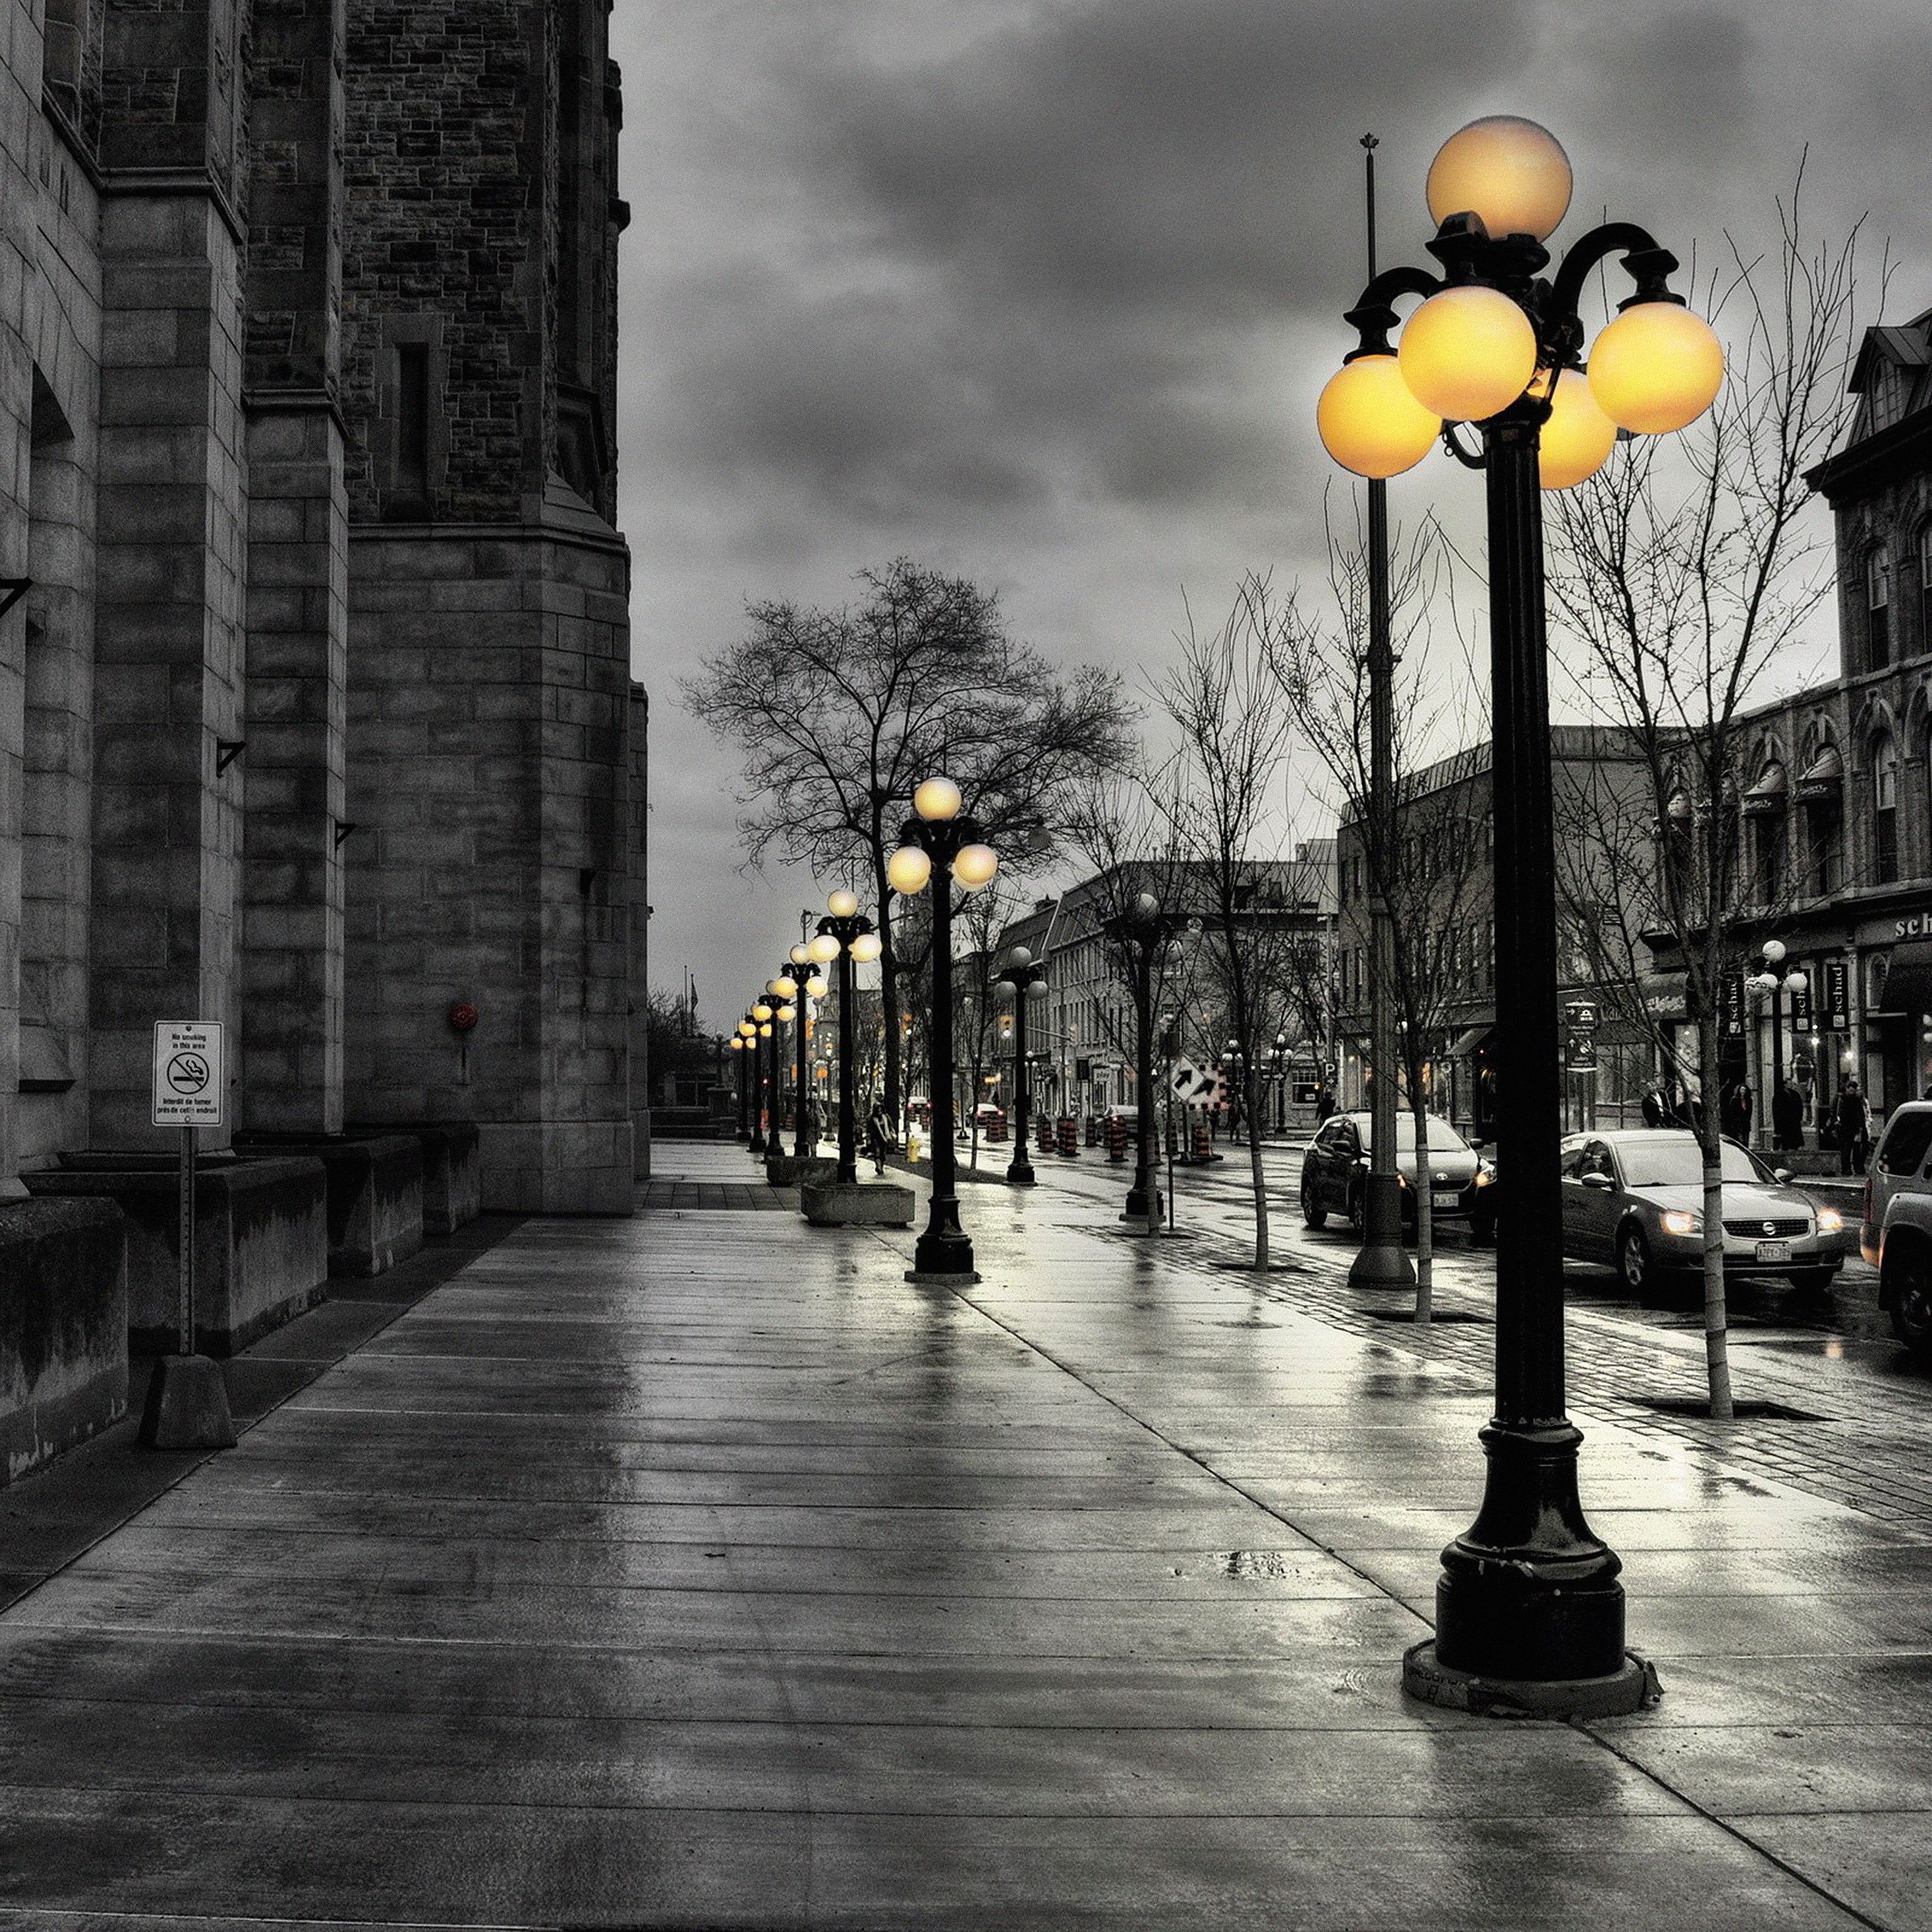 Dark Street With Lamps